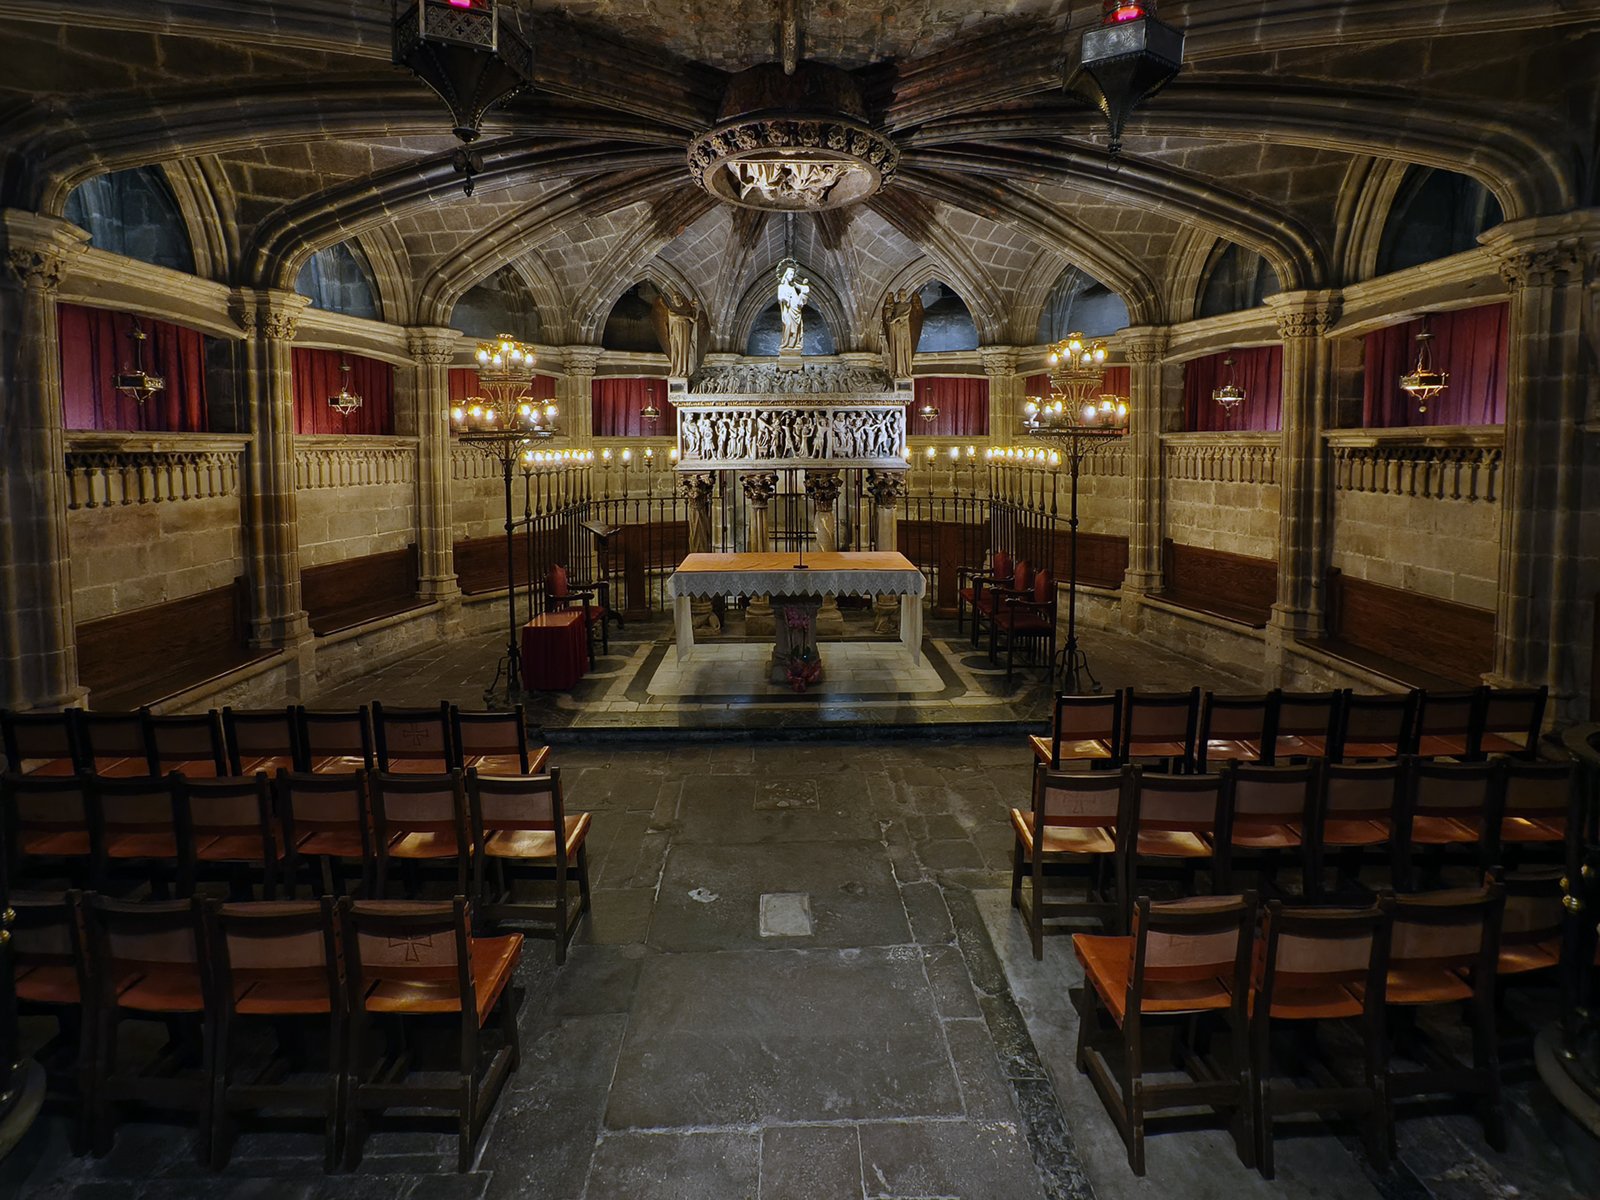 Interior of a gothic chapel with vaulted ceilings, wooden pews, and an ornate altar featuring a statue of a figure in a blue robe. decorative stonework and a chandelier enhance the historical ambiance.